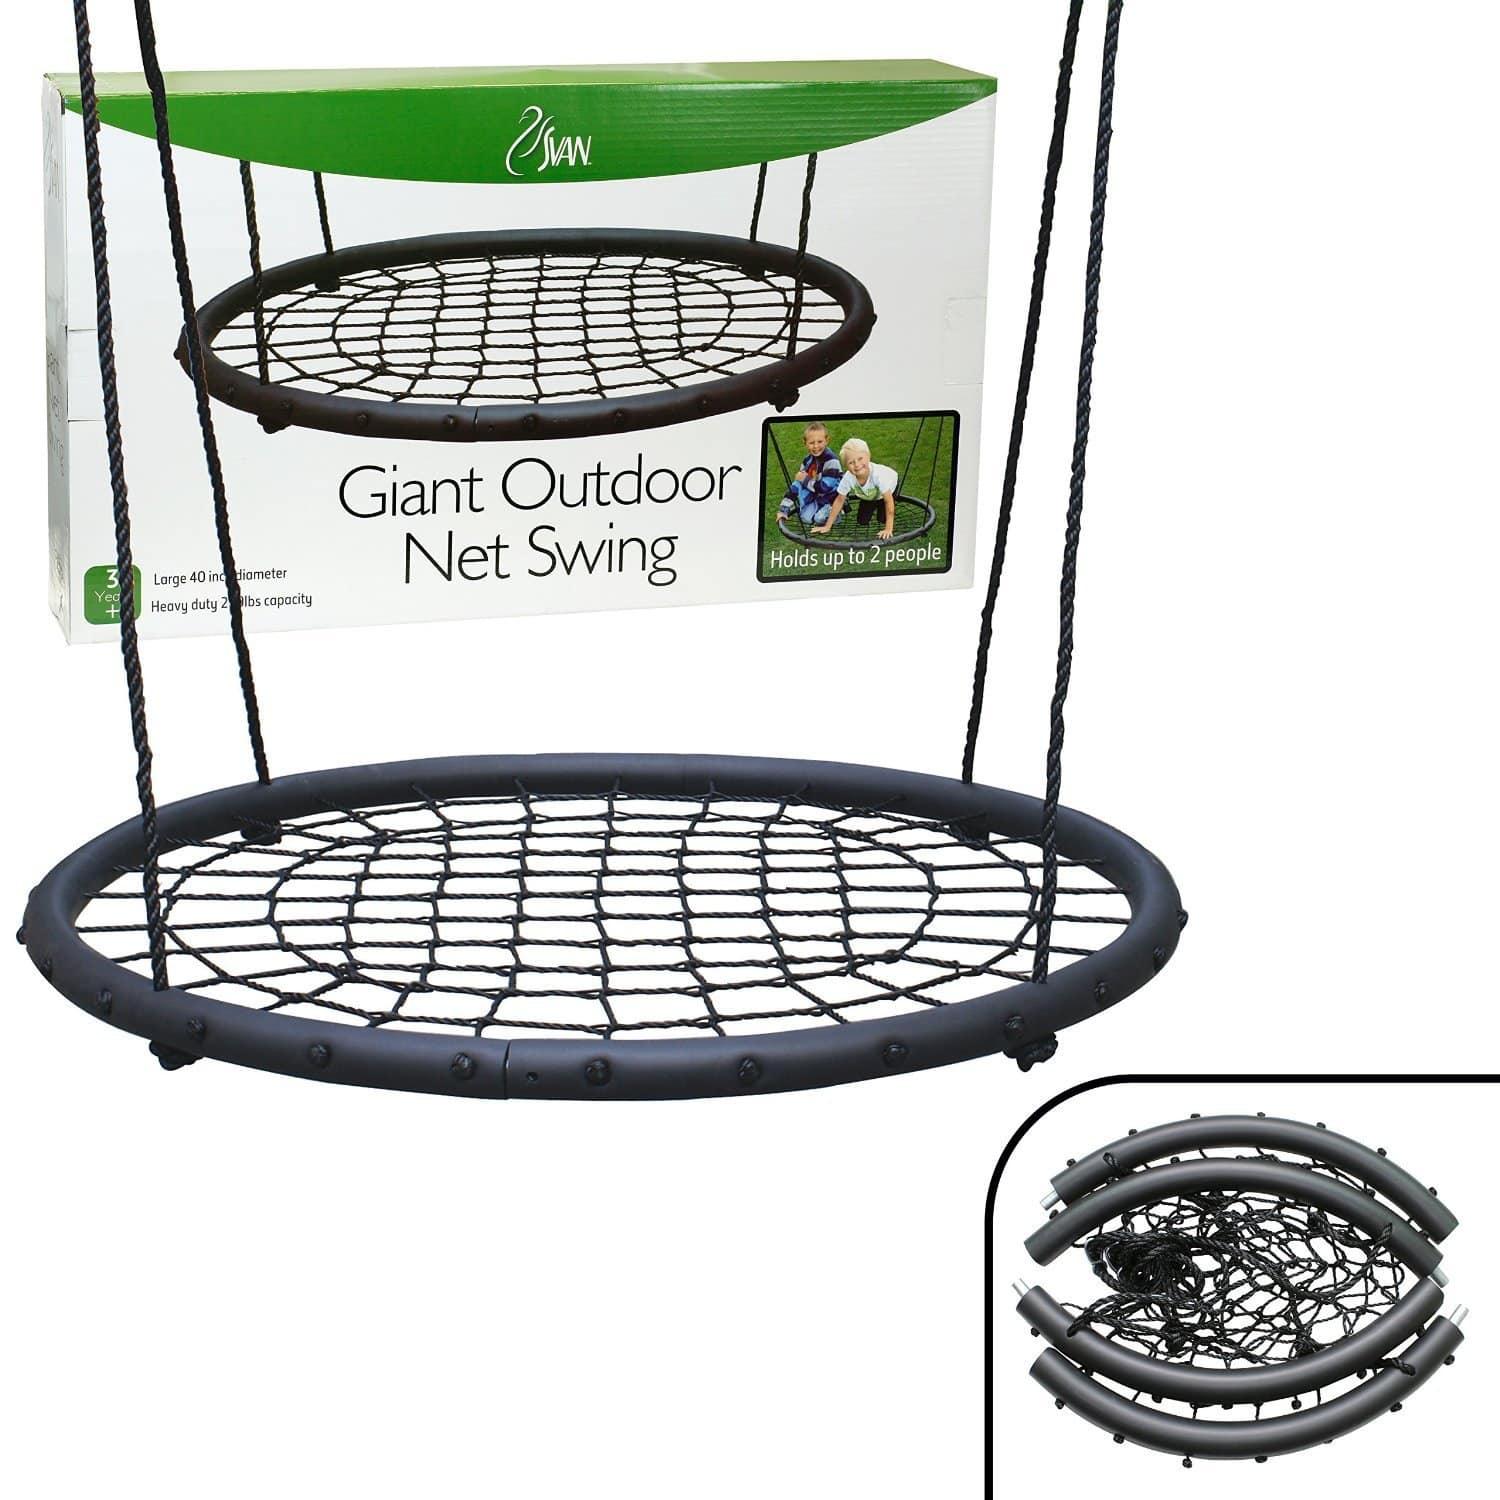 LIGHTNING DEAL ALERT! Two Person Outdoor Spider Web Swing – 34% off